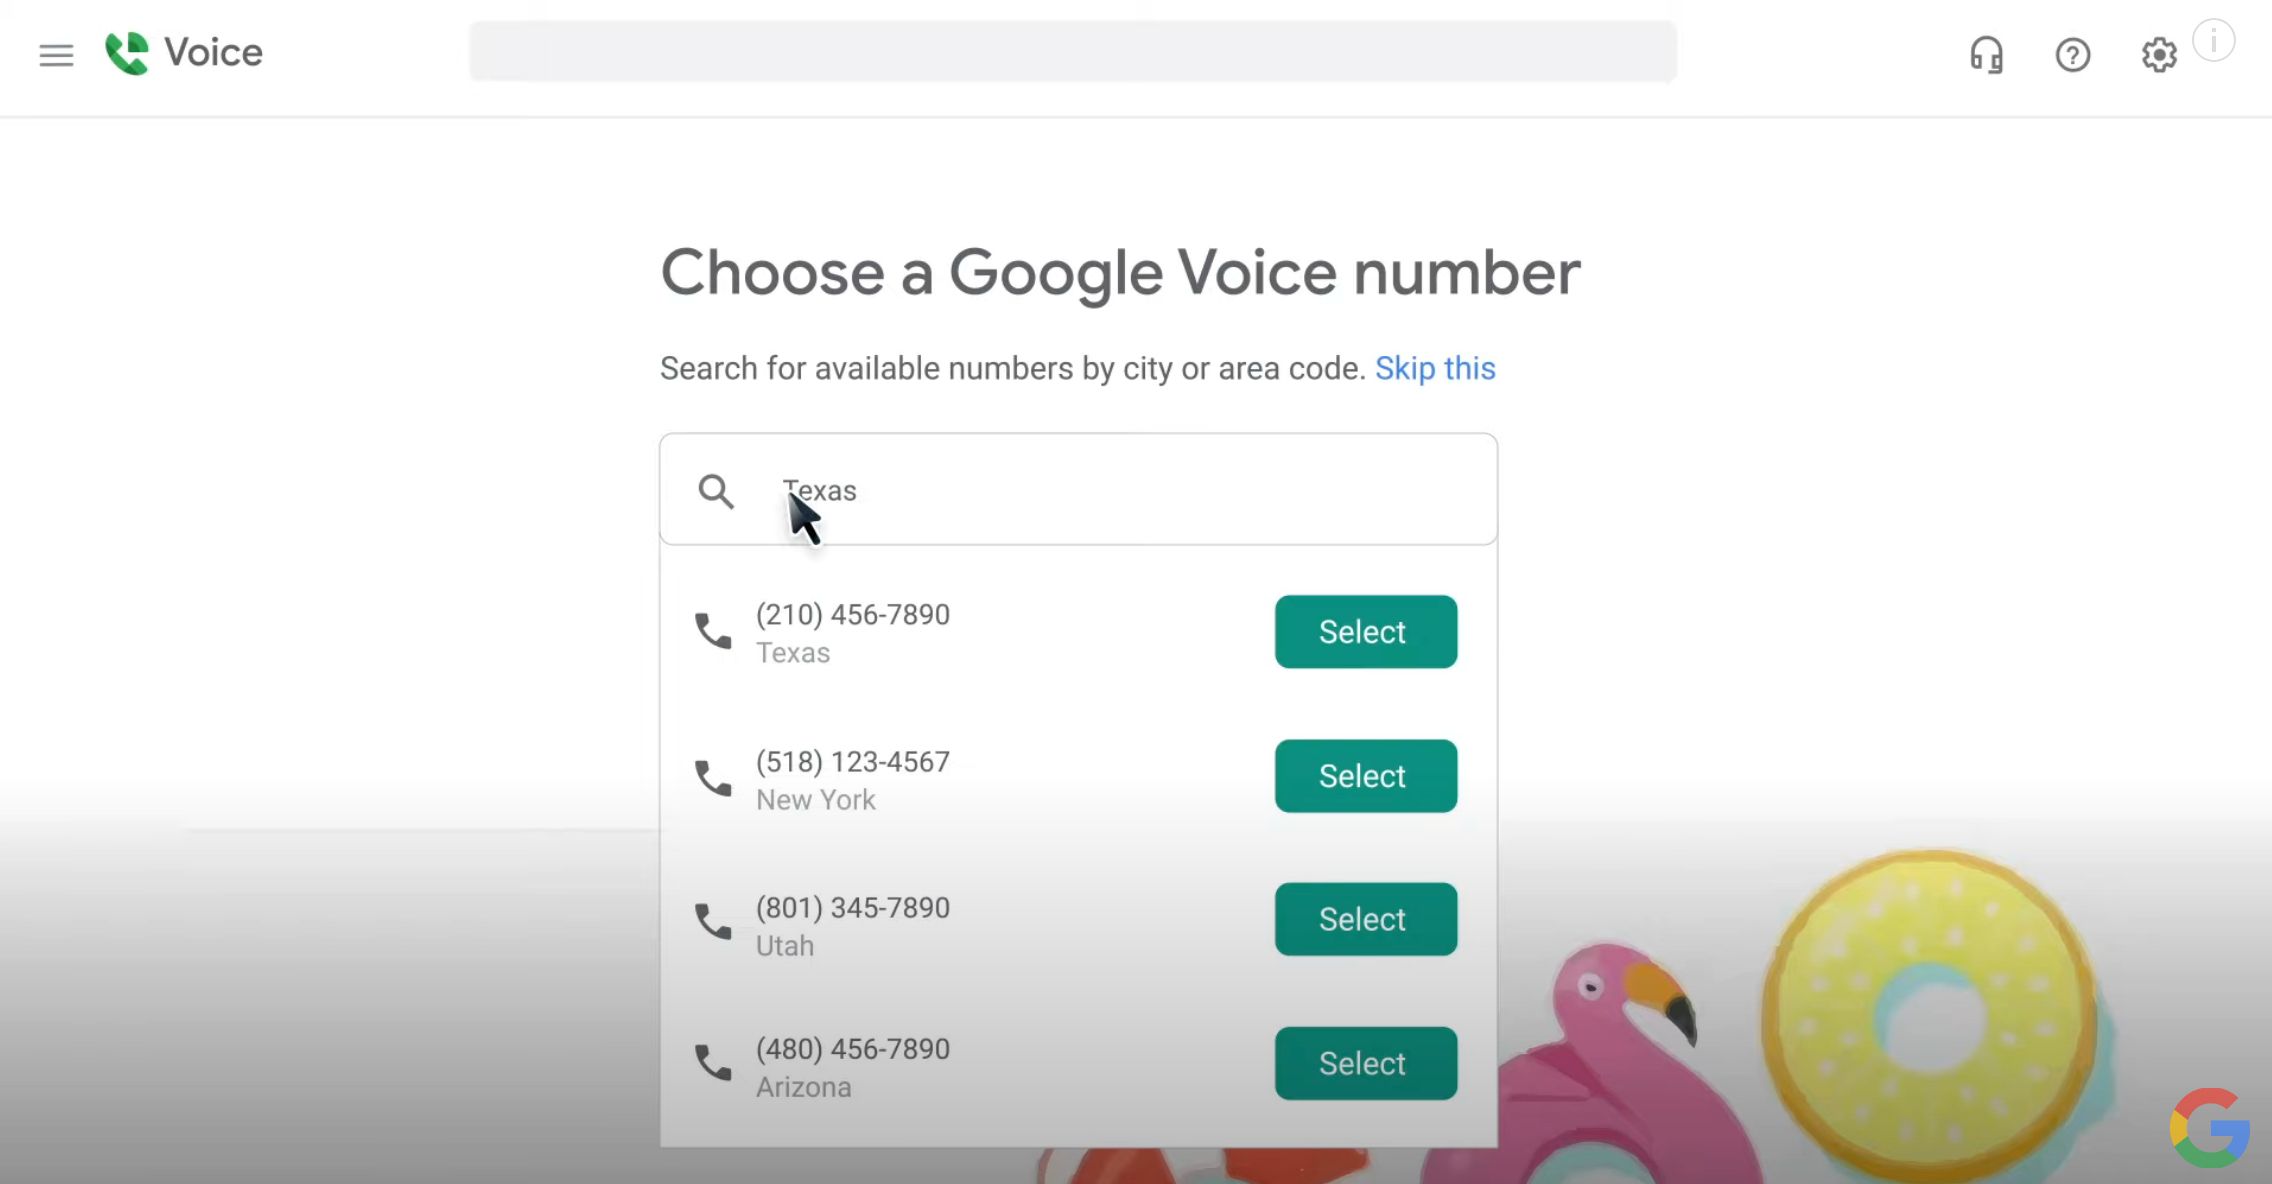 Choosing a number in Google Voice setup.